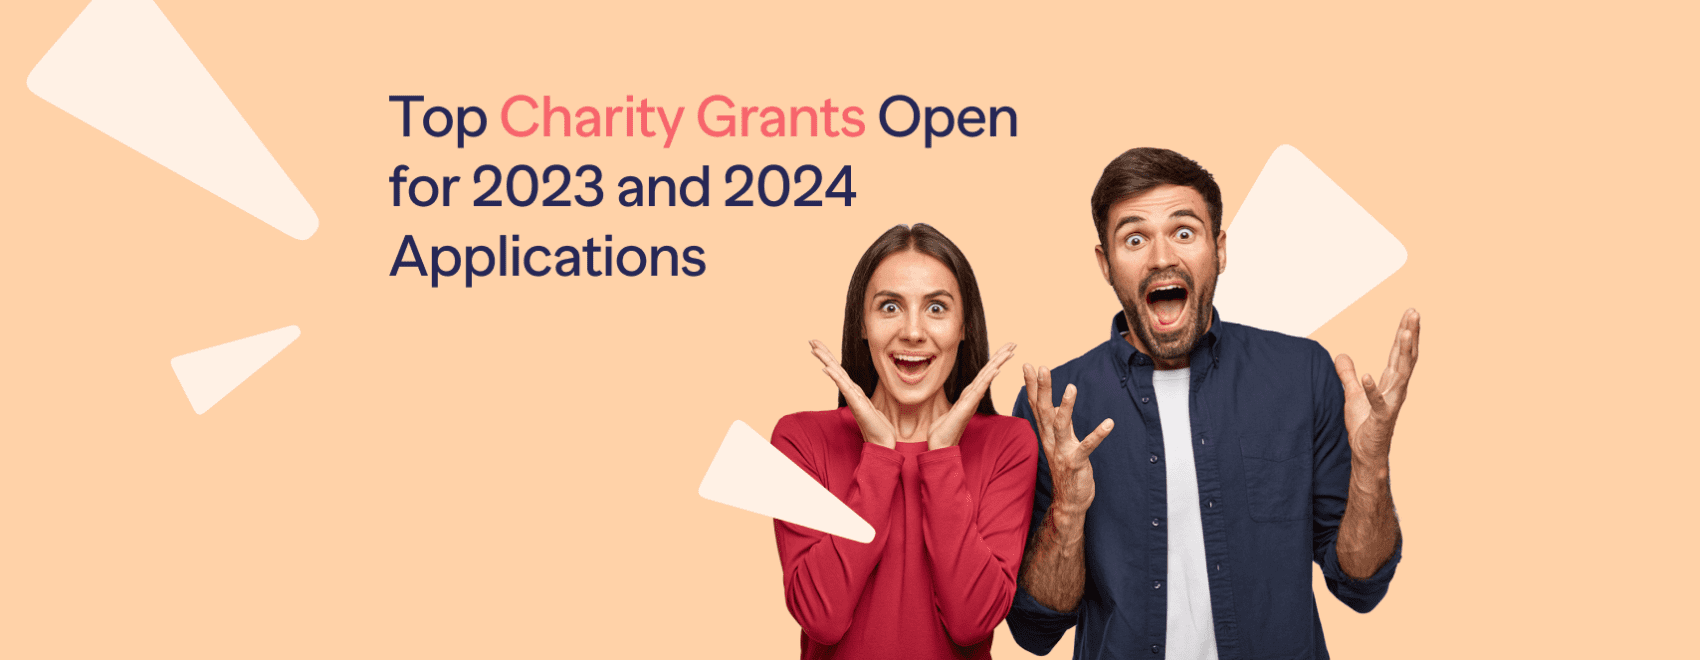 Top Charity Grants Open for 2023 and 2024 Applications